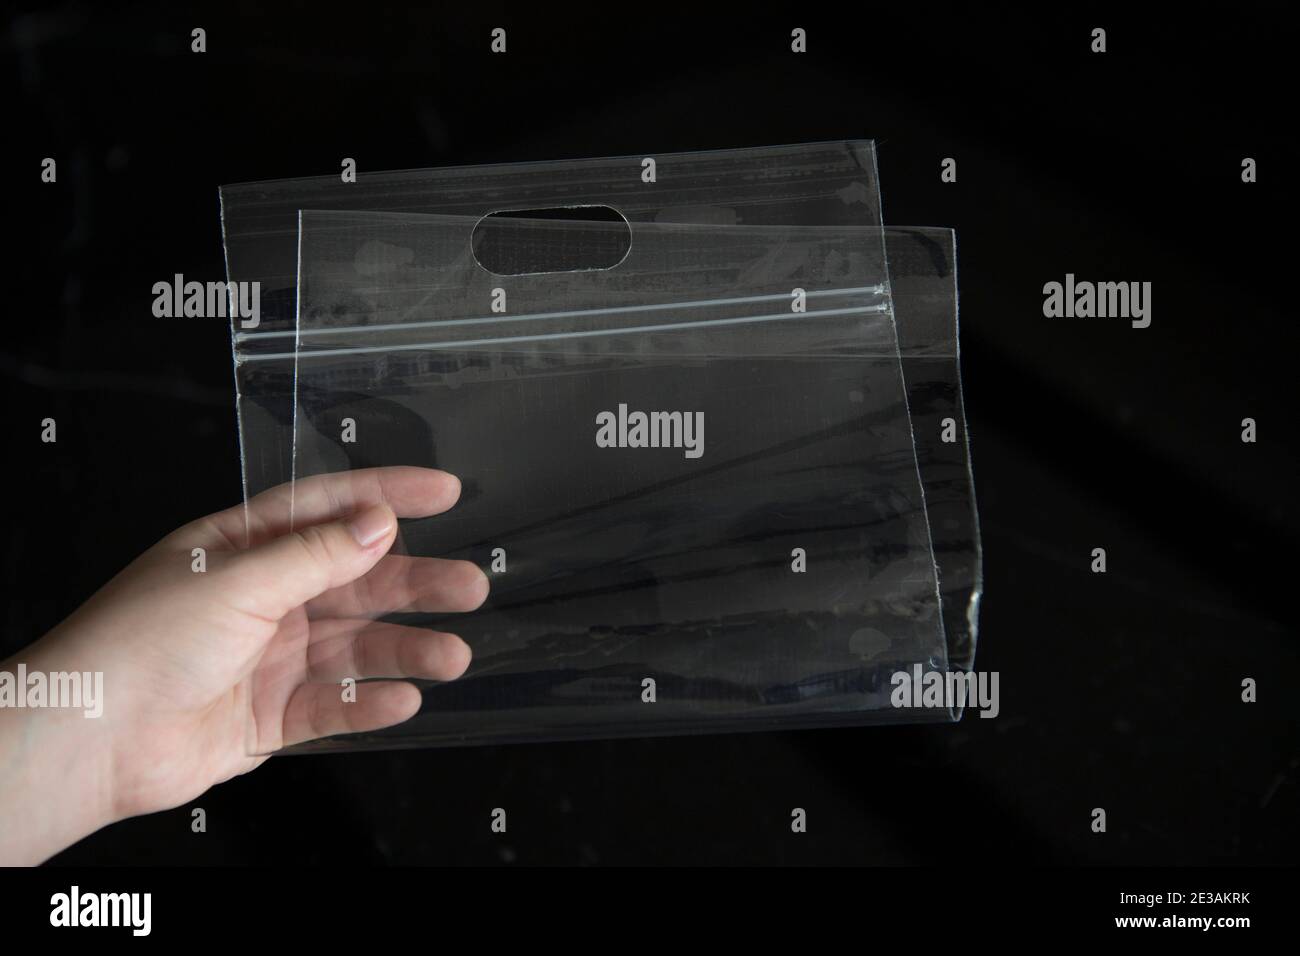 https://c8.alamy.com/comp/2E3AKRK/the-zipper-plastic-bag-is-picked-up-to-show-transparency-on-a-black-background-2E3AKRK.jpg